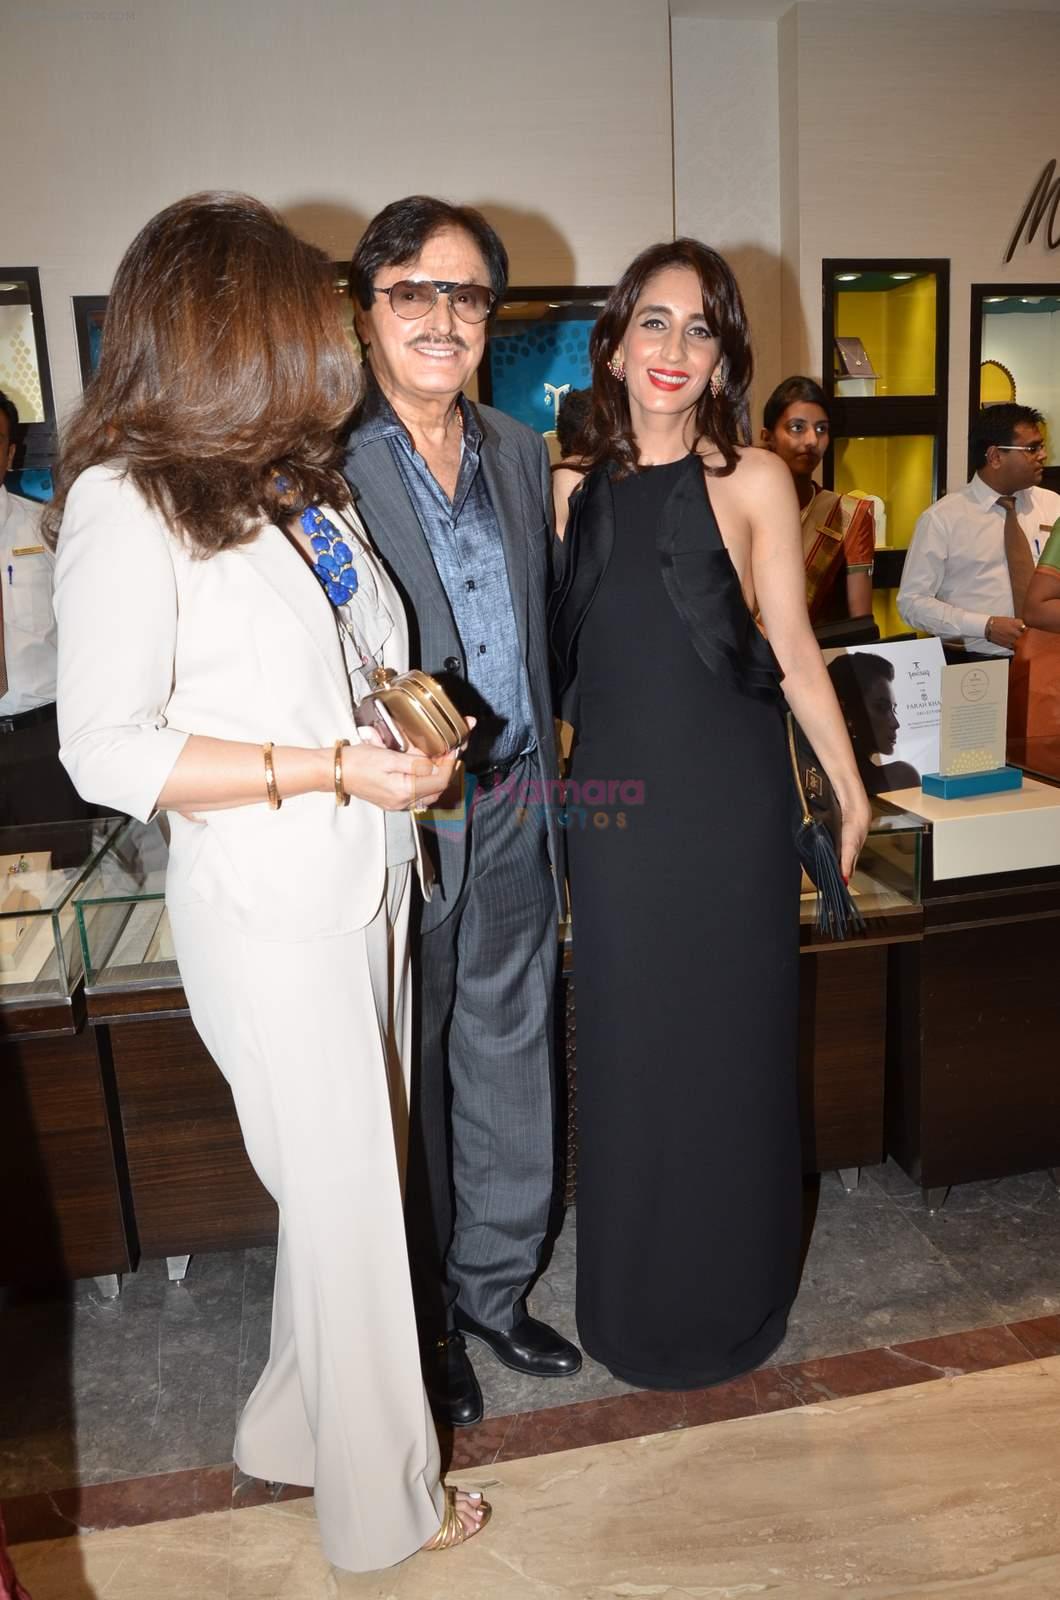 Farah Khan Ali's new collection launch with Tanishq in Andheri, Mumbai on 13th Aug 2015